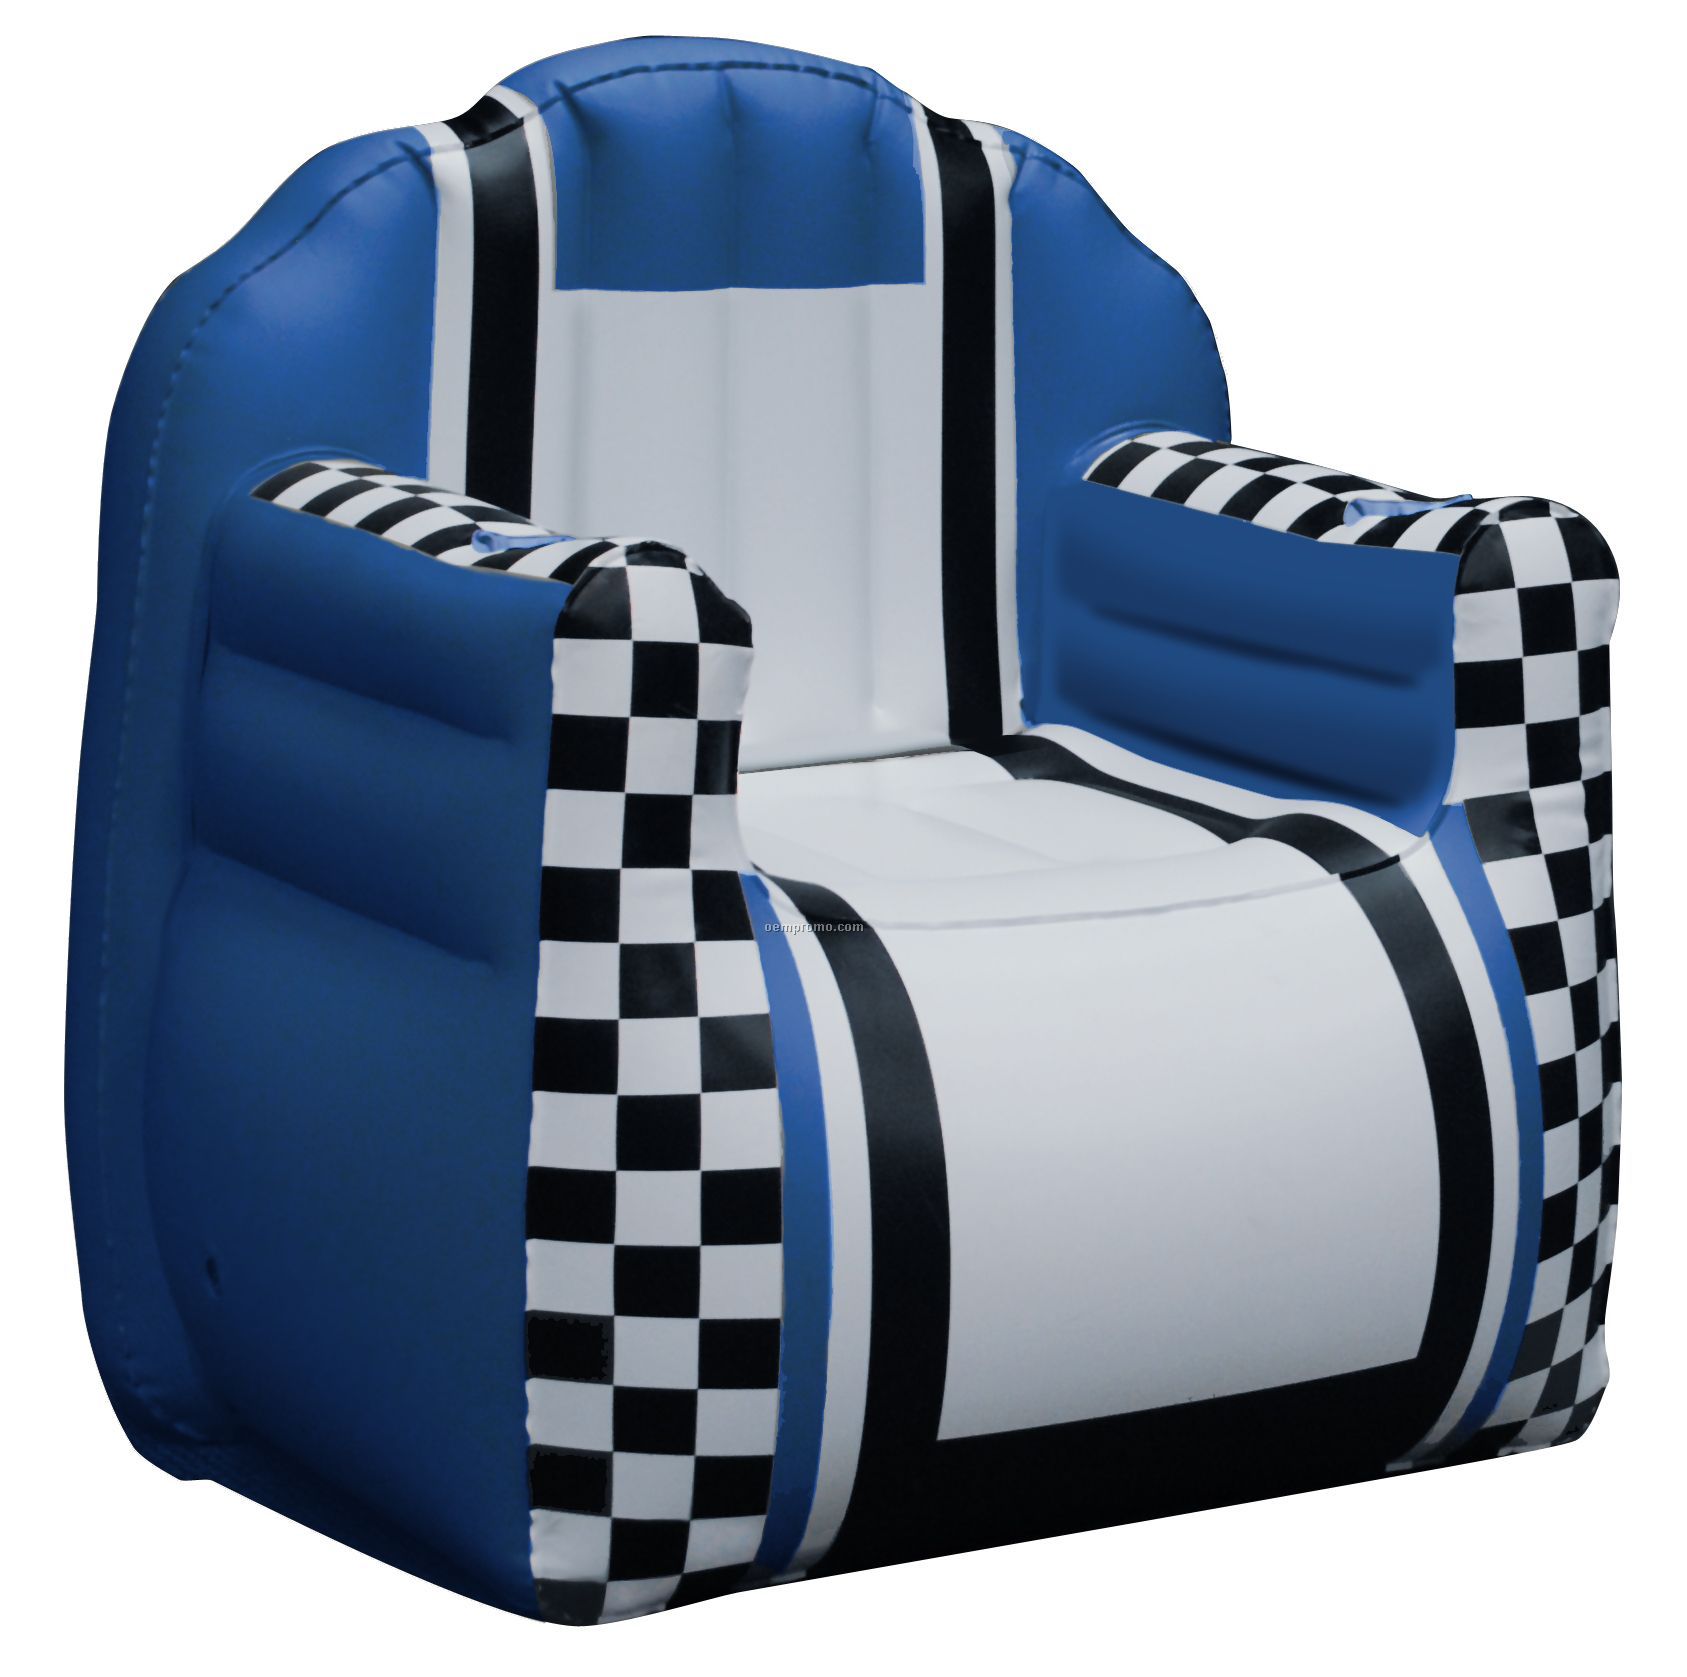 Inflate-a-seat "Chair": Blue/White/Black With Checkered Arms